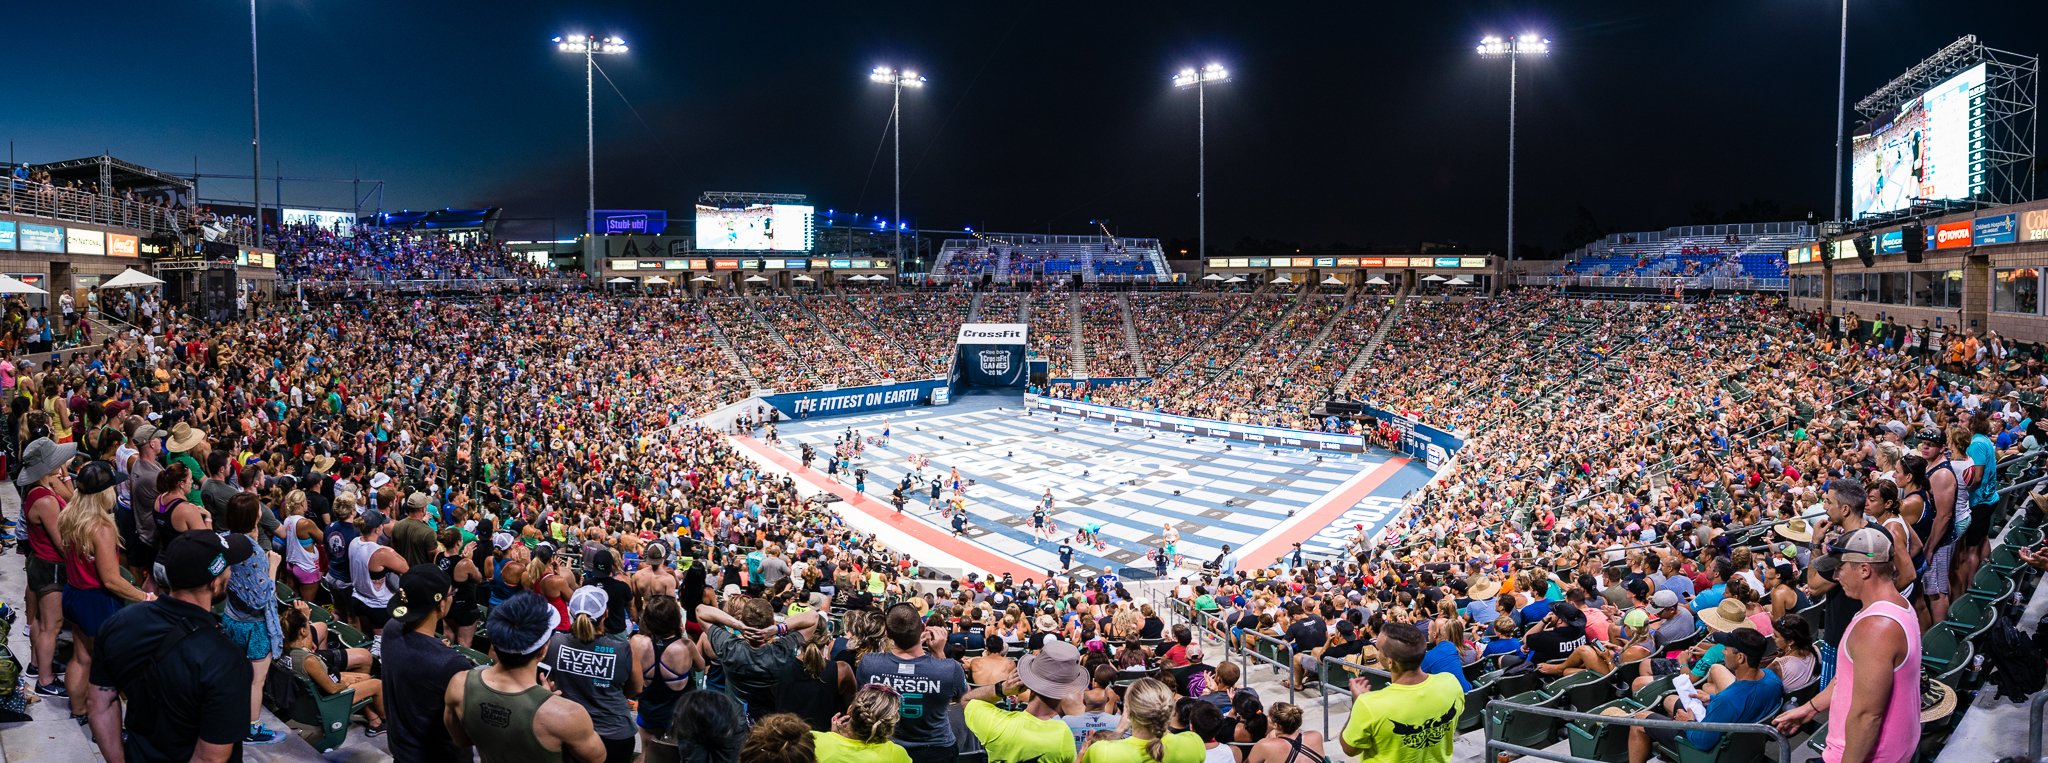 The CrossFit Games on Twitter: "The location of the 2017 Reebok CrossFit Games will be announced the CrossFit Invitational this weekend. 📺 https://t.co/tiUpTmj6jh https://t.co/nTA91ZFd6a" / Twitter